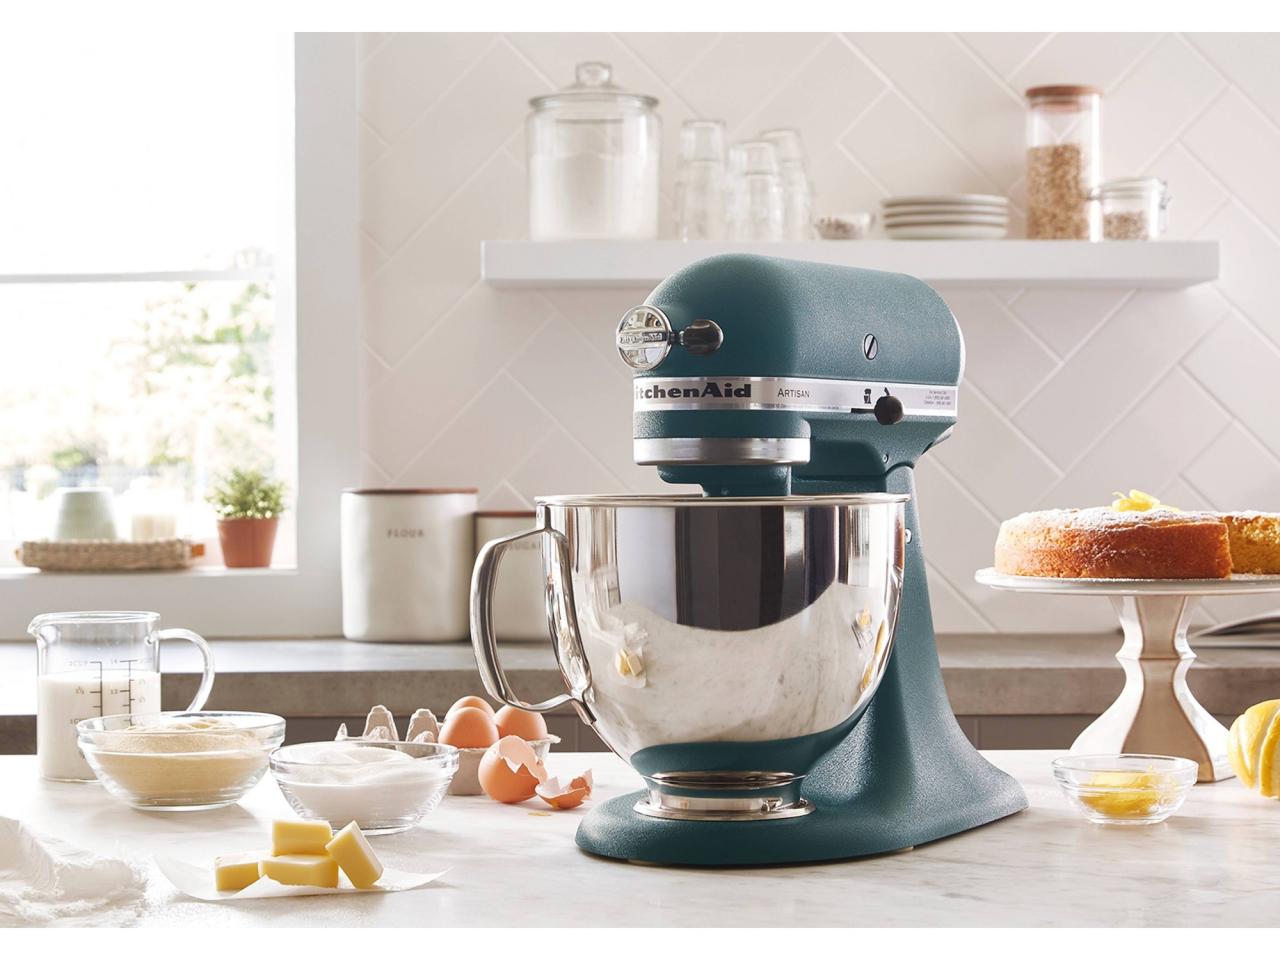 KitchenAid Large Mixer on Sale at Costco for the Holidays